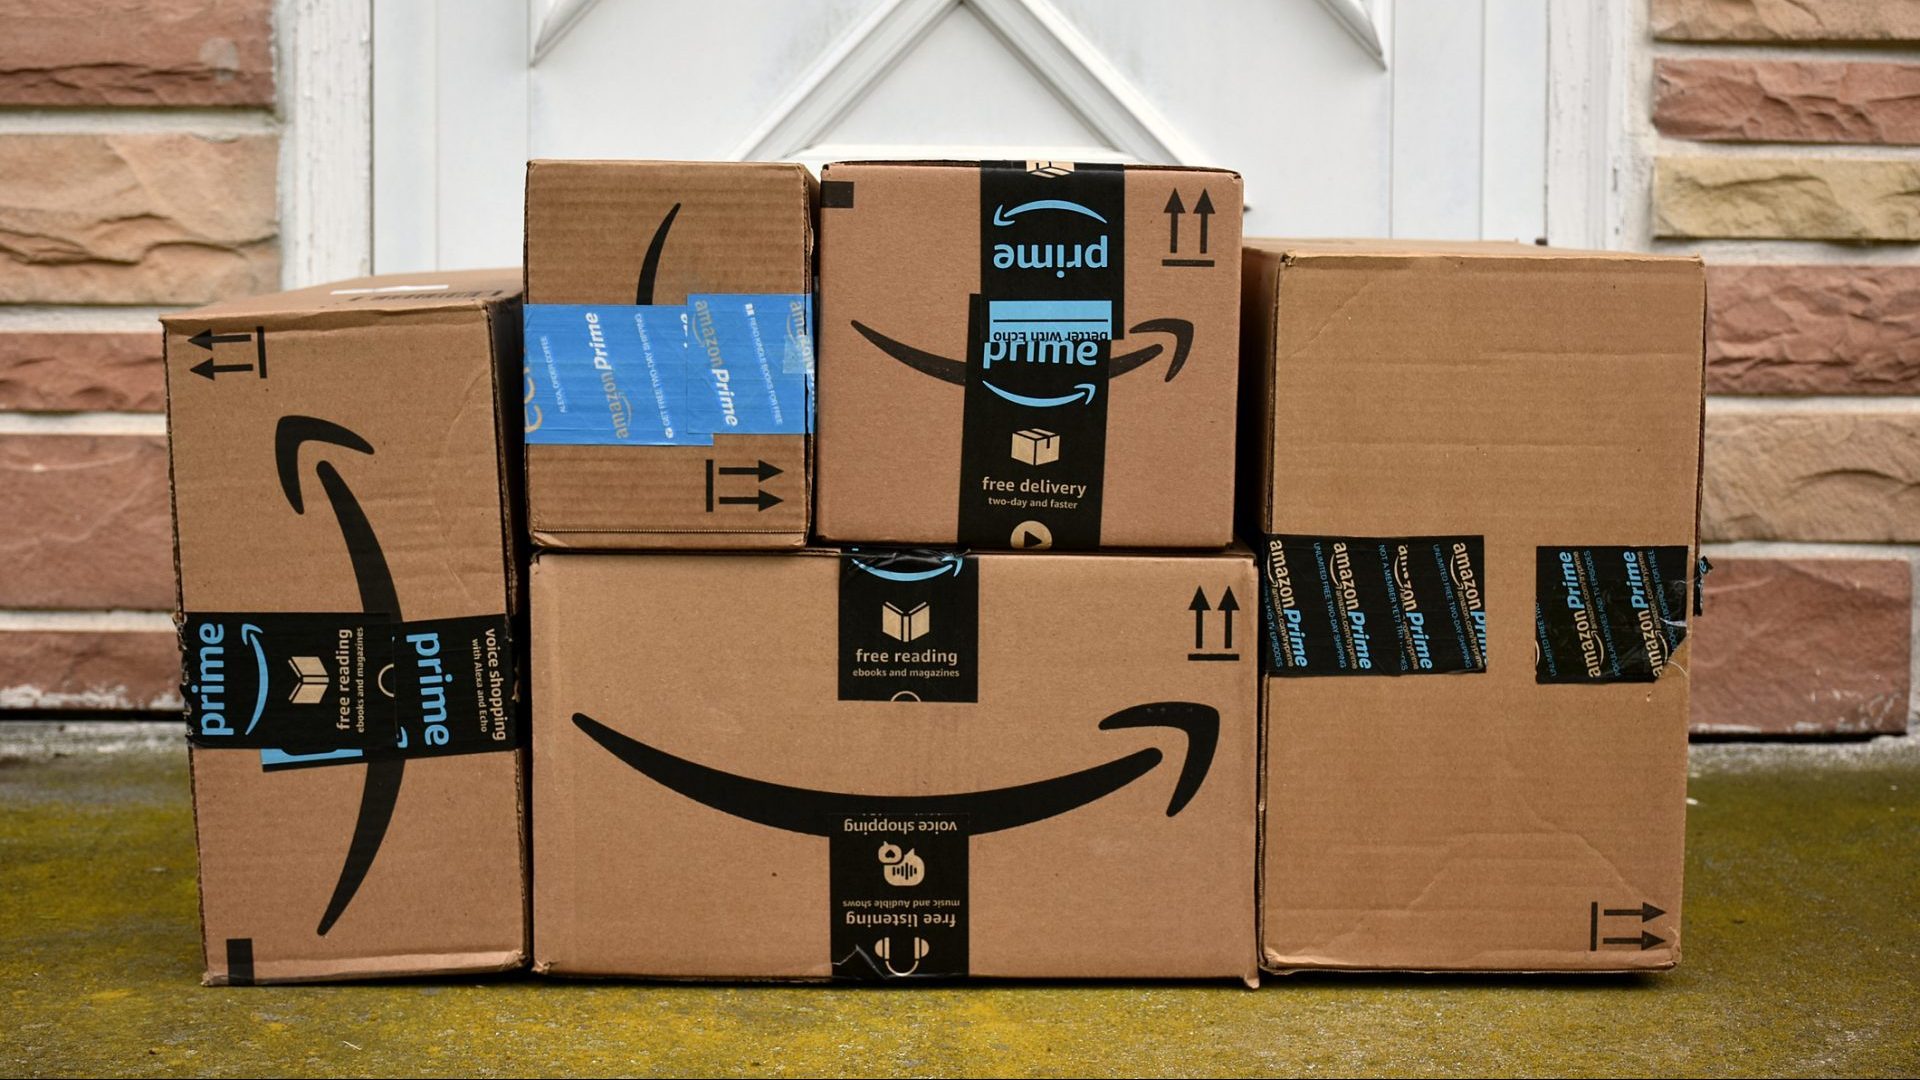 Amazon Dropshipping: What It Is and How to Get Started - GOBankingRates